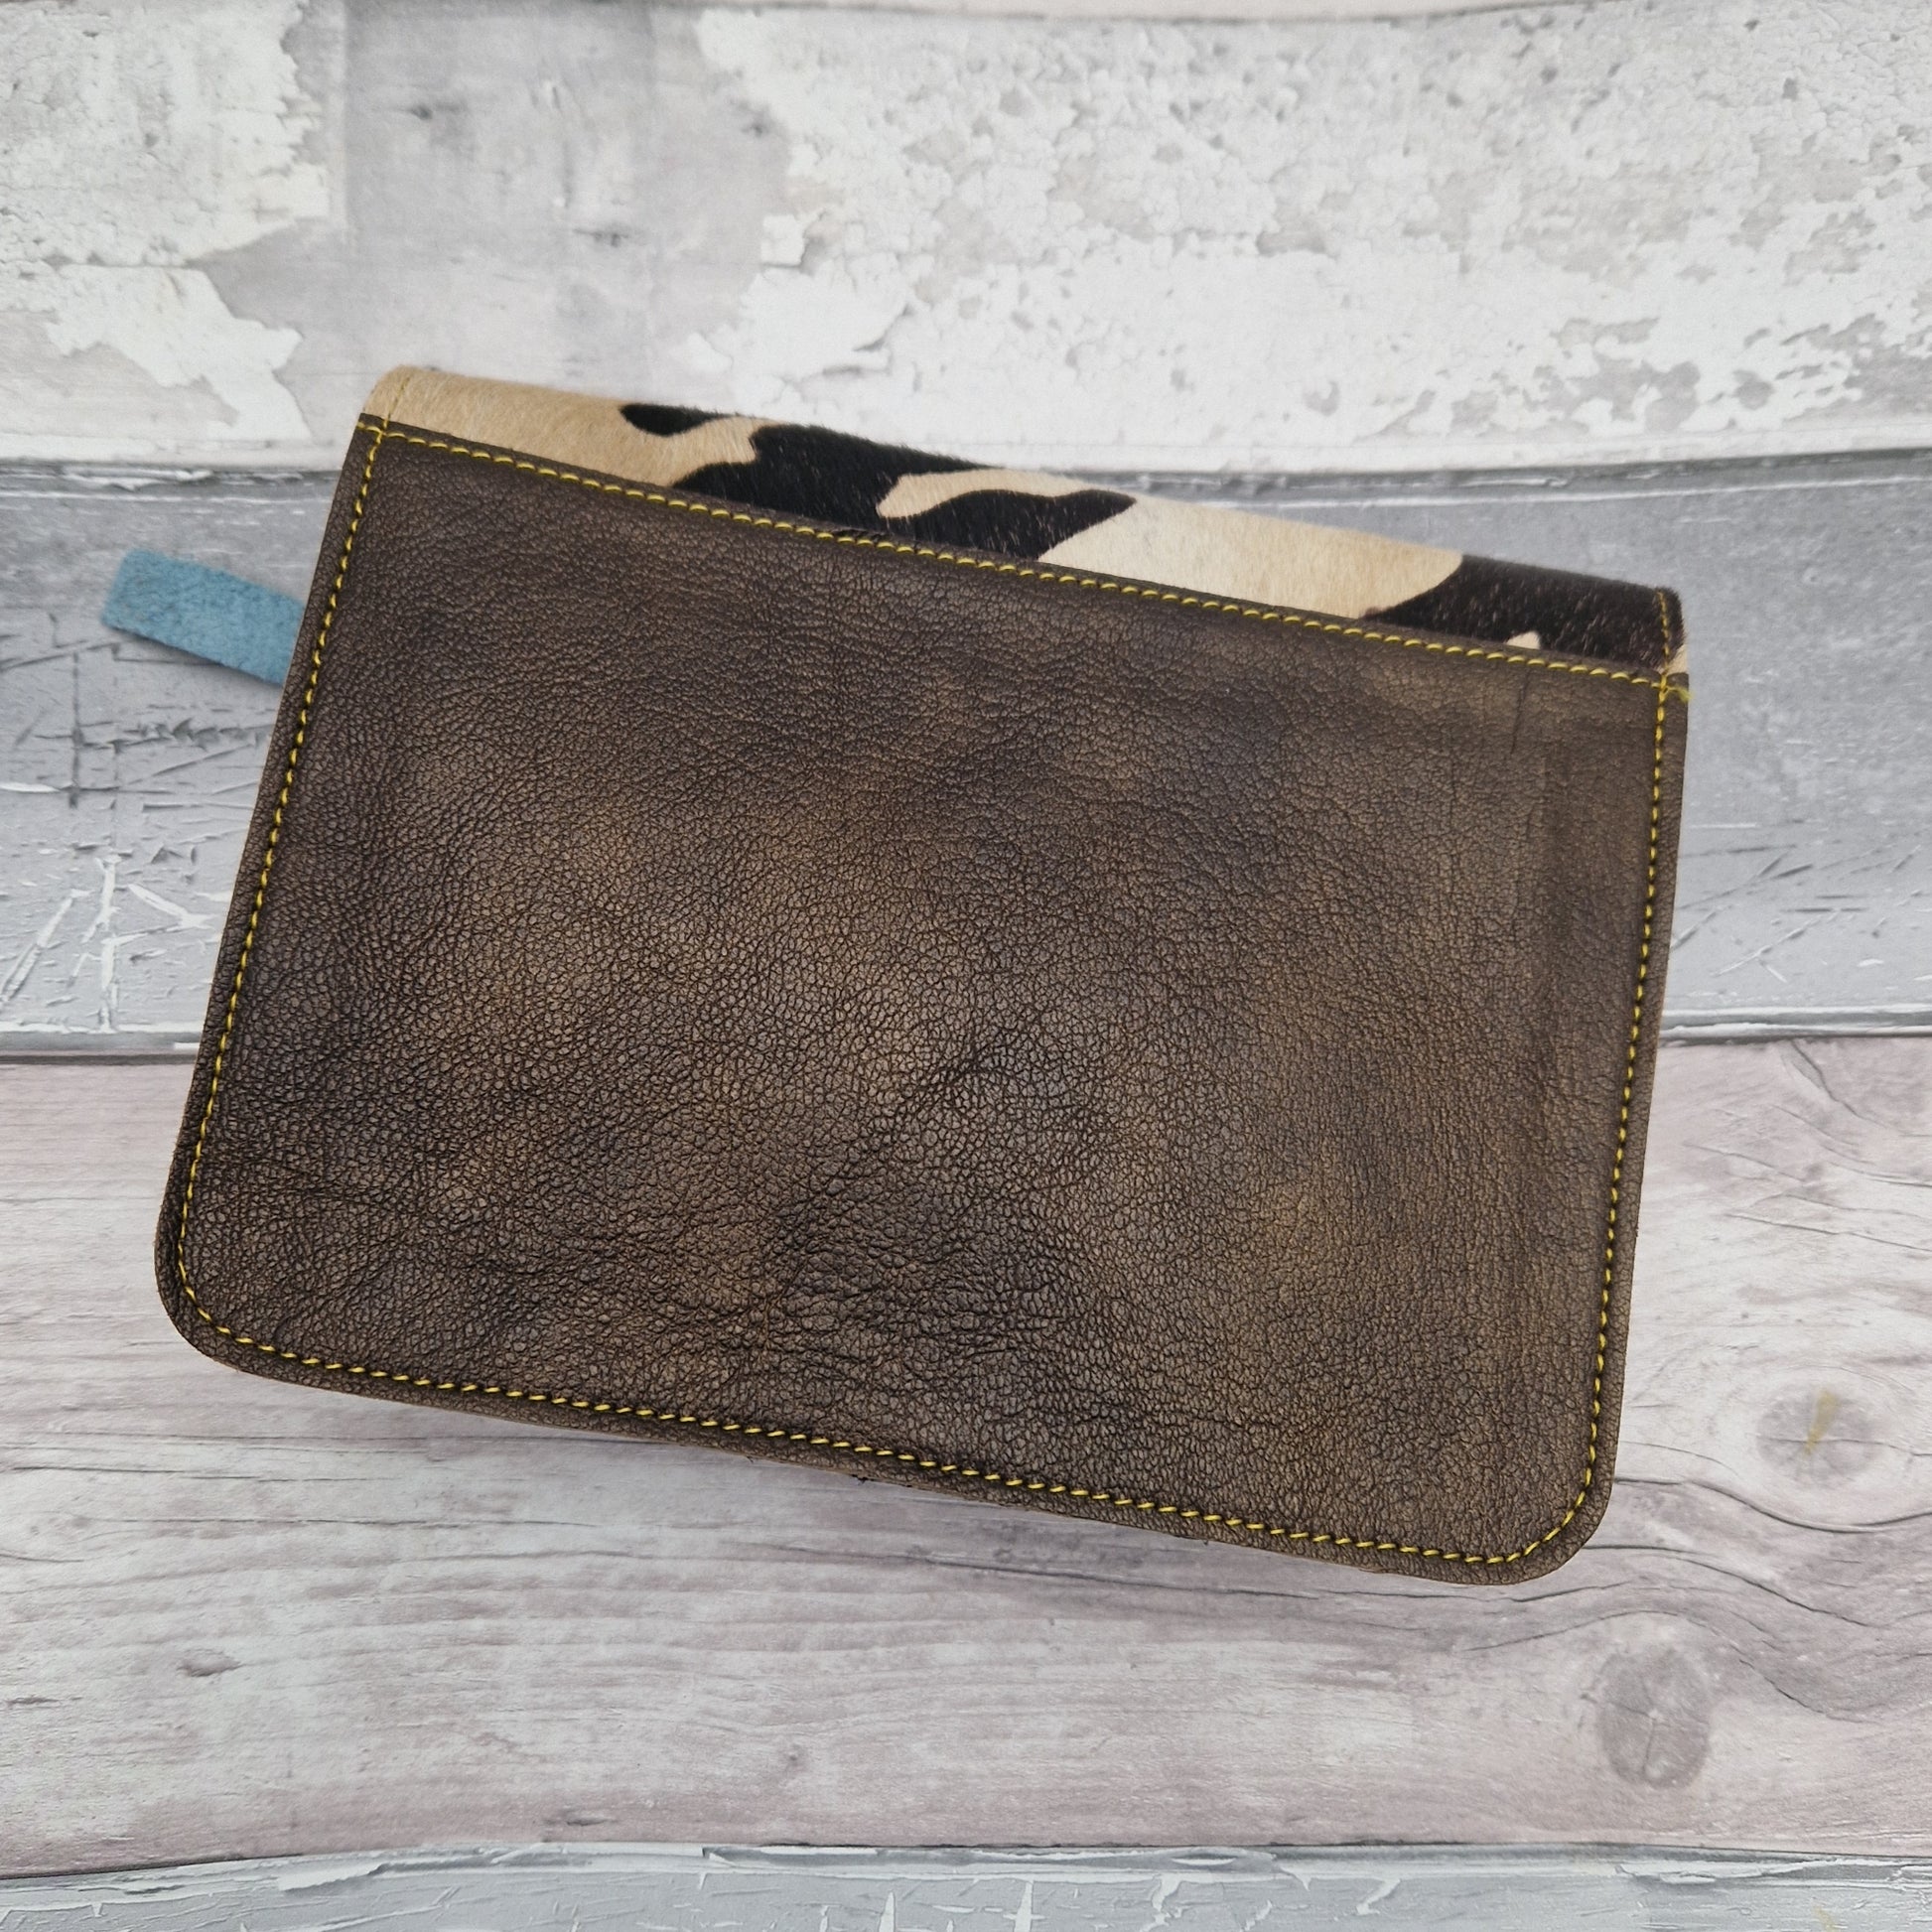 Brown leather satchel style bag with textured front panel in cow hide print.